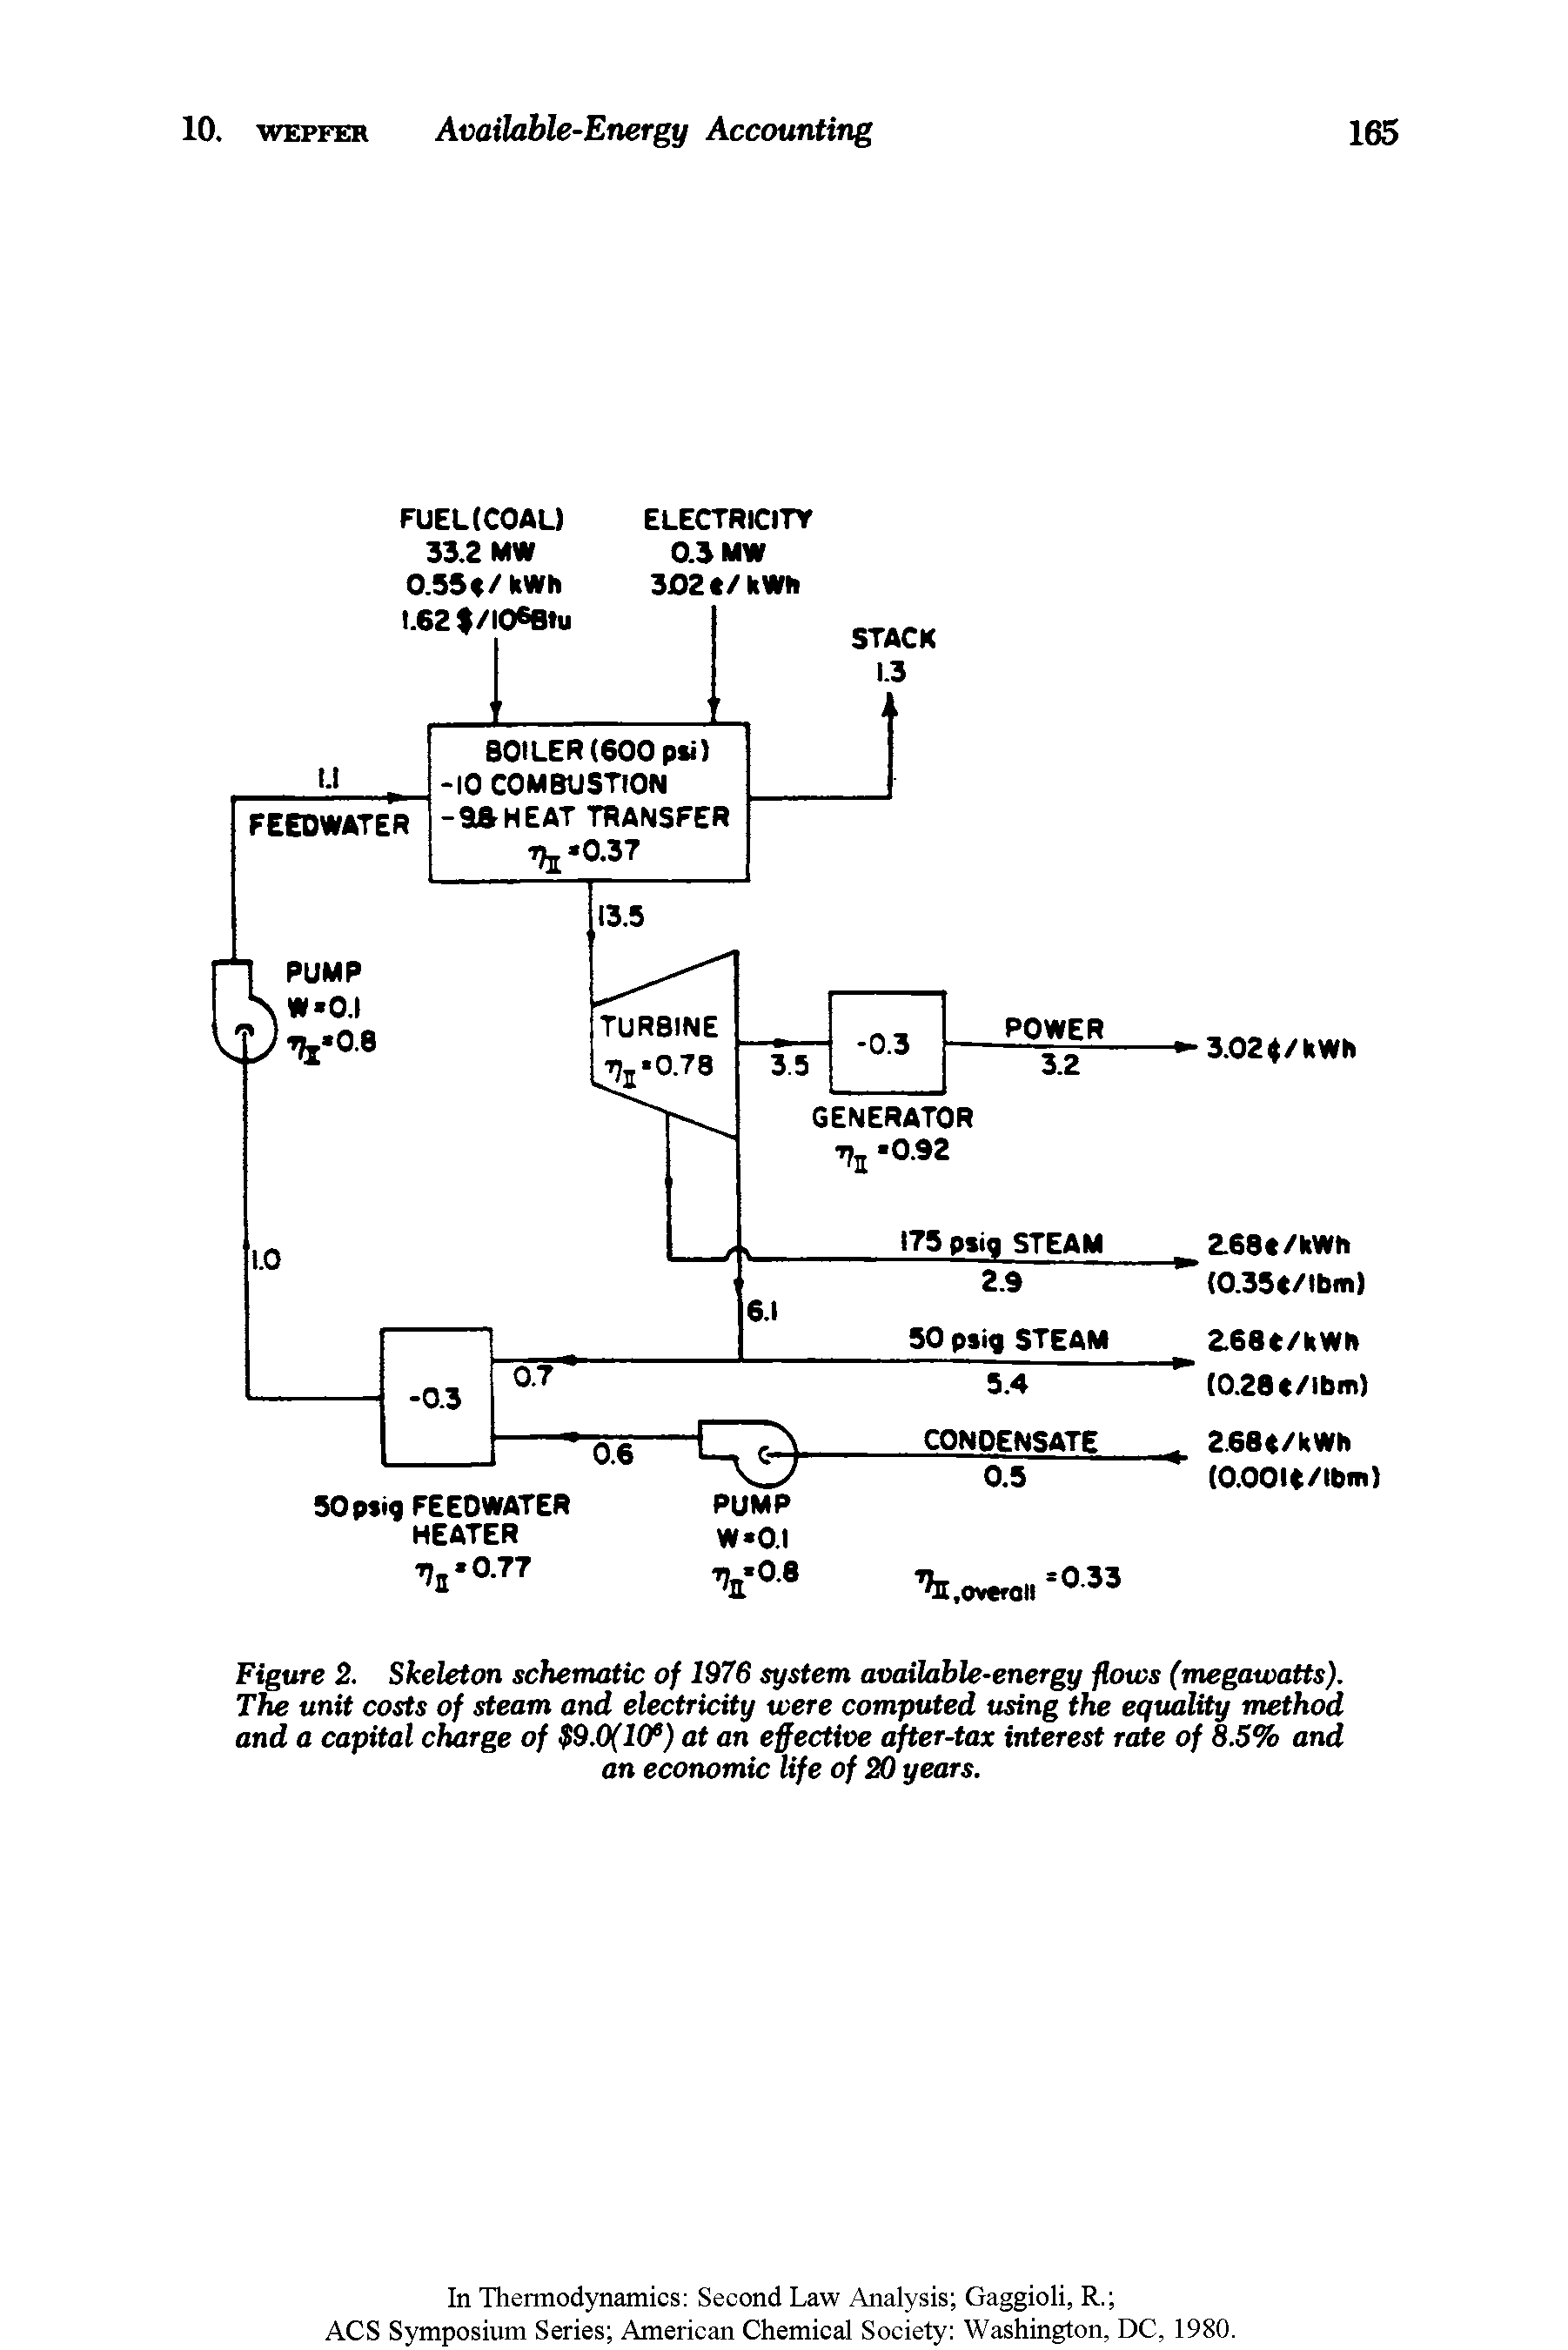 Figure 2. Skeleton schematic of 1976 system available-energy flows (megawatts). The unit costs of steam and electricity were computed using the equality method and a capital charge of 9.0(10 ) at an effective after-tax interest rate of 8.5% and an economic life of 20 years.